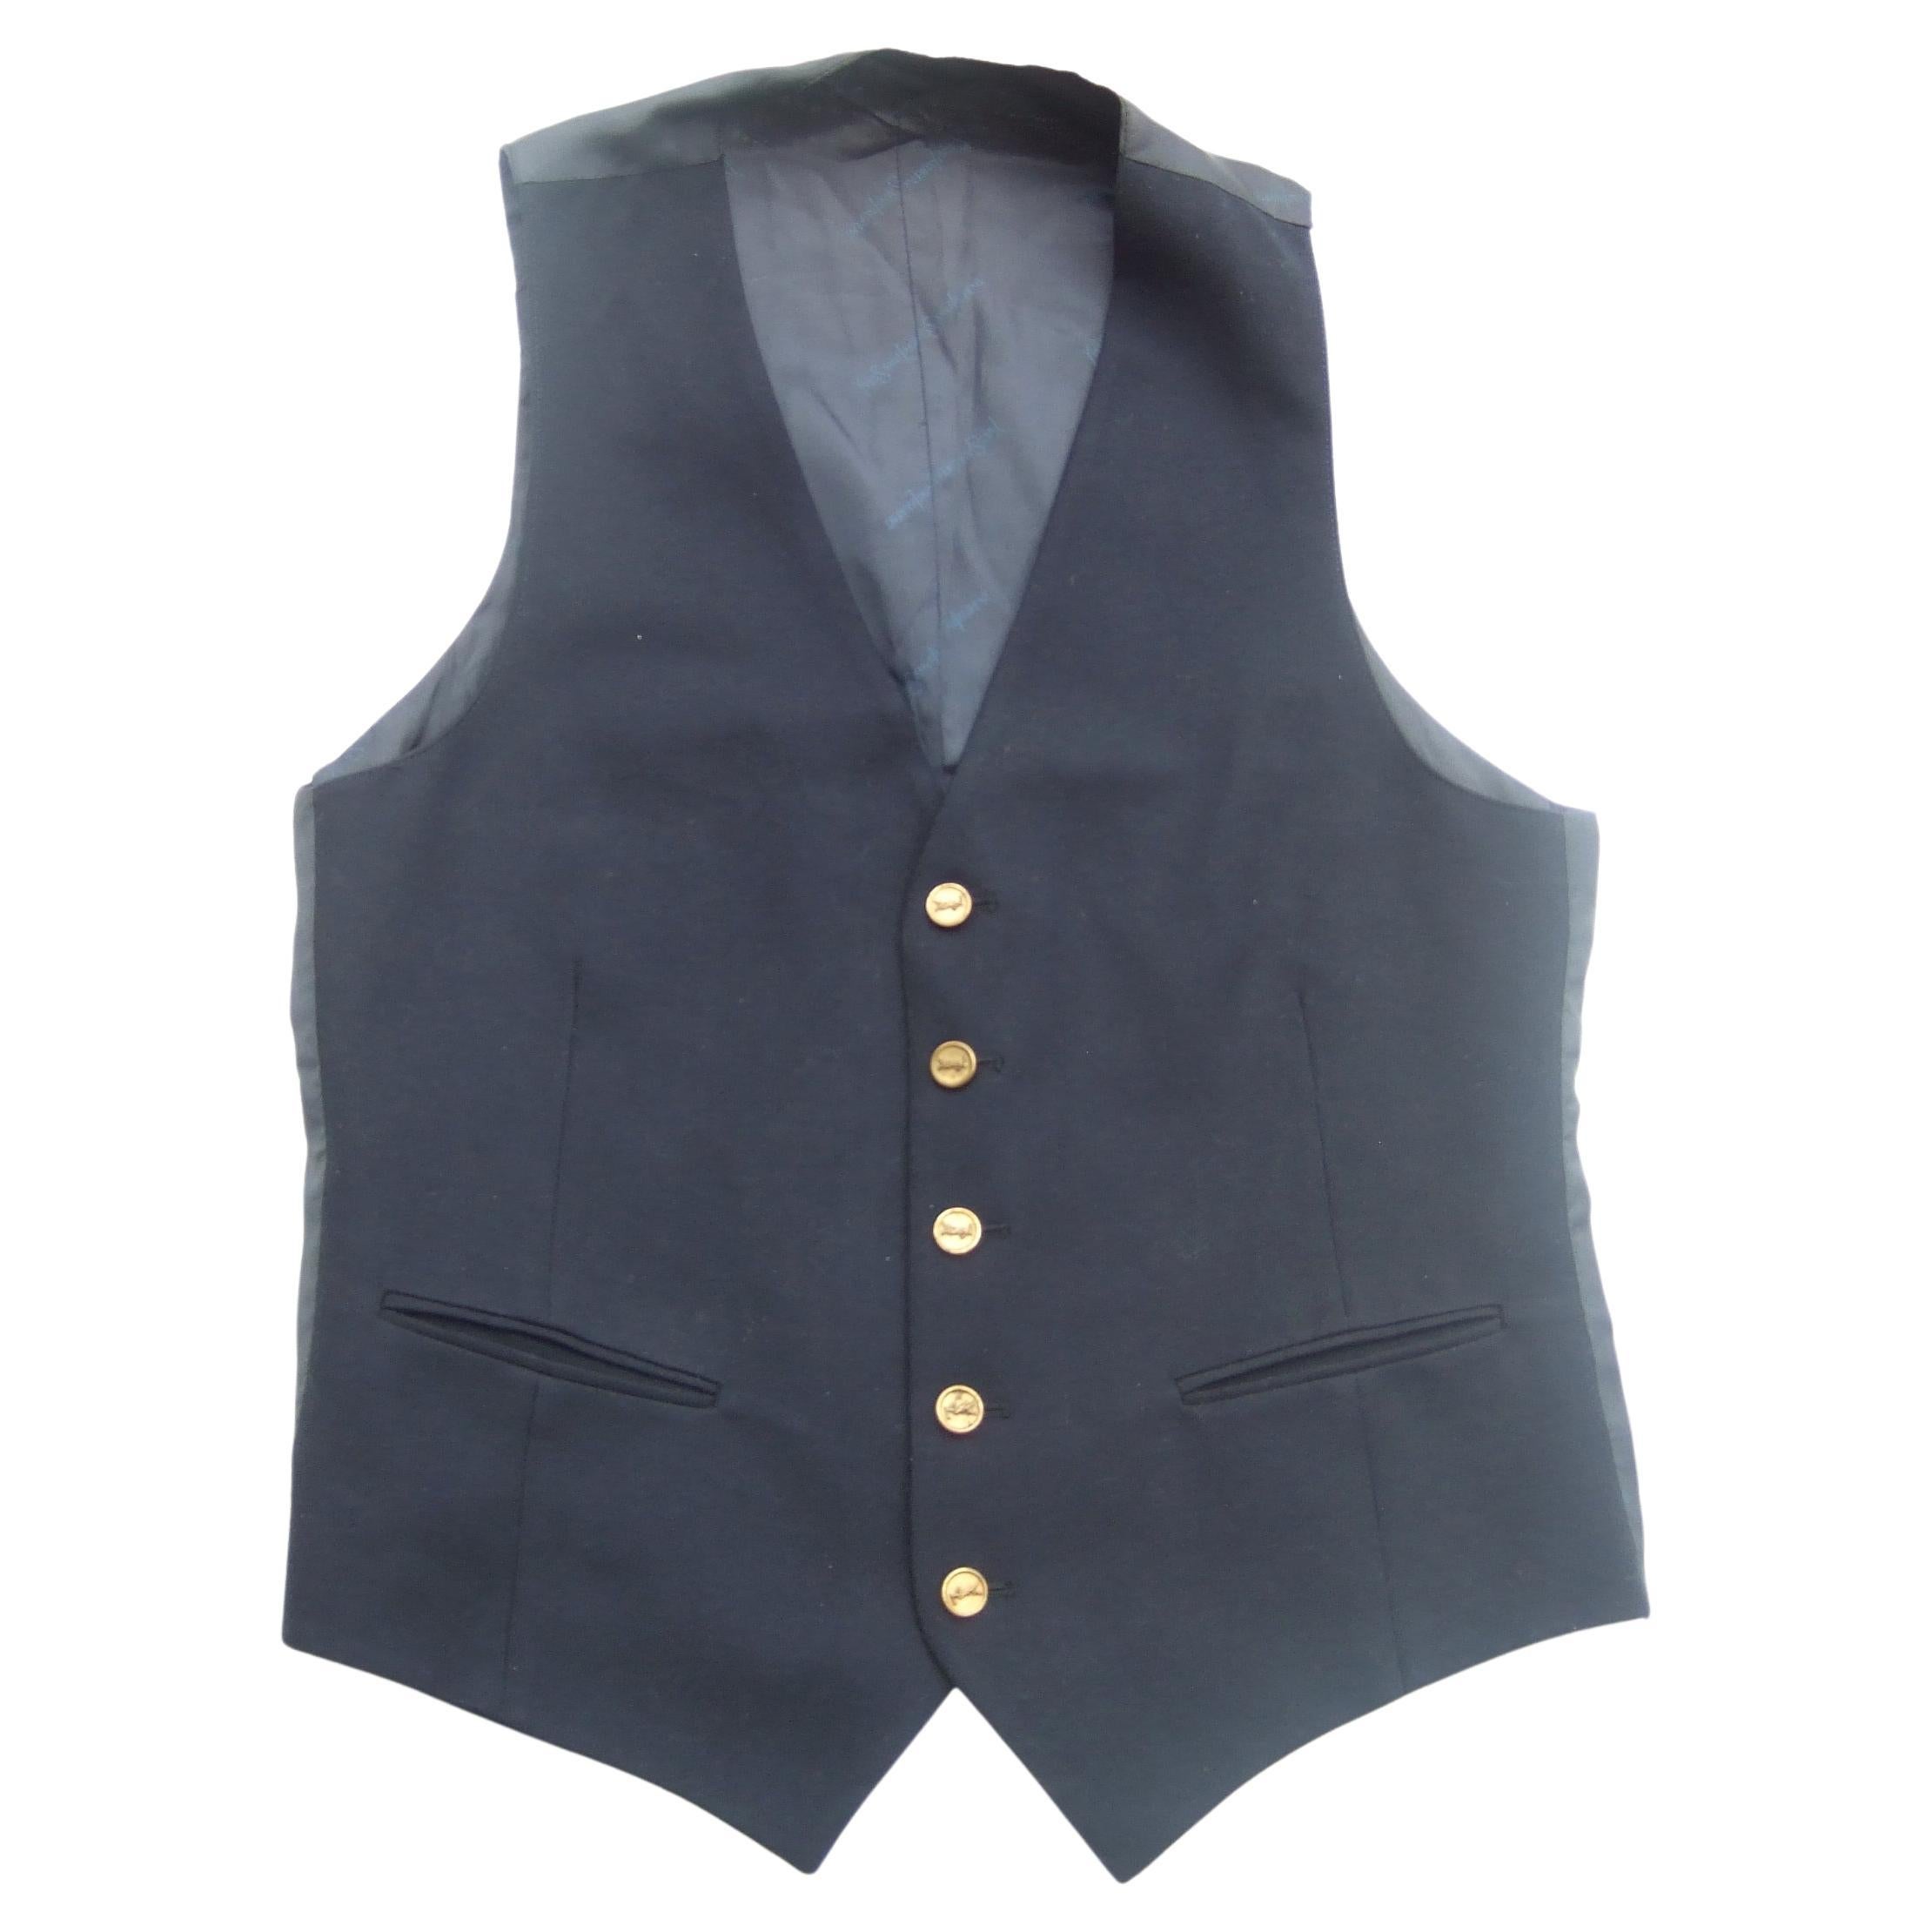 Yves Saint Laurent Dark blue wool men's - unisex vest adorned with YSL brass metal buttons c 1970s

The classic dark blue wool vest is designed with a pair of slit pockets on the lower front section. The backside & interior are constructed with